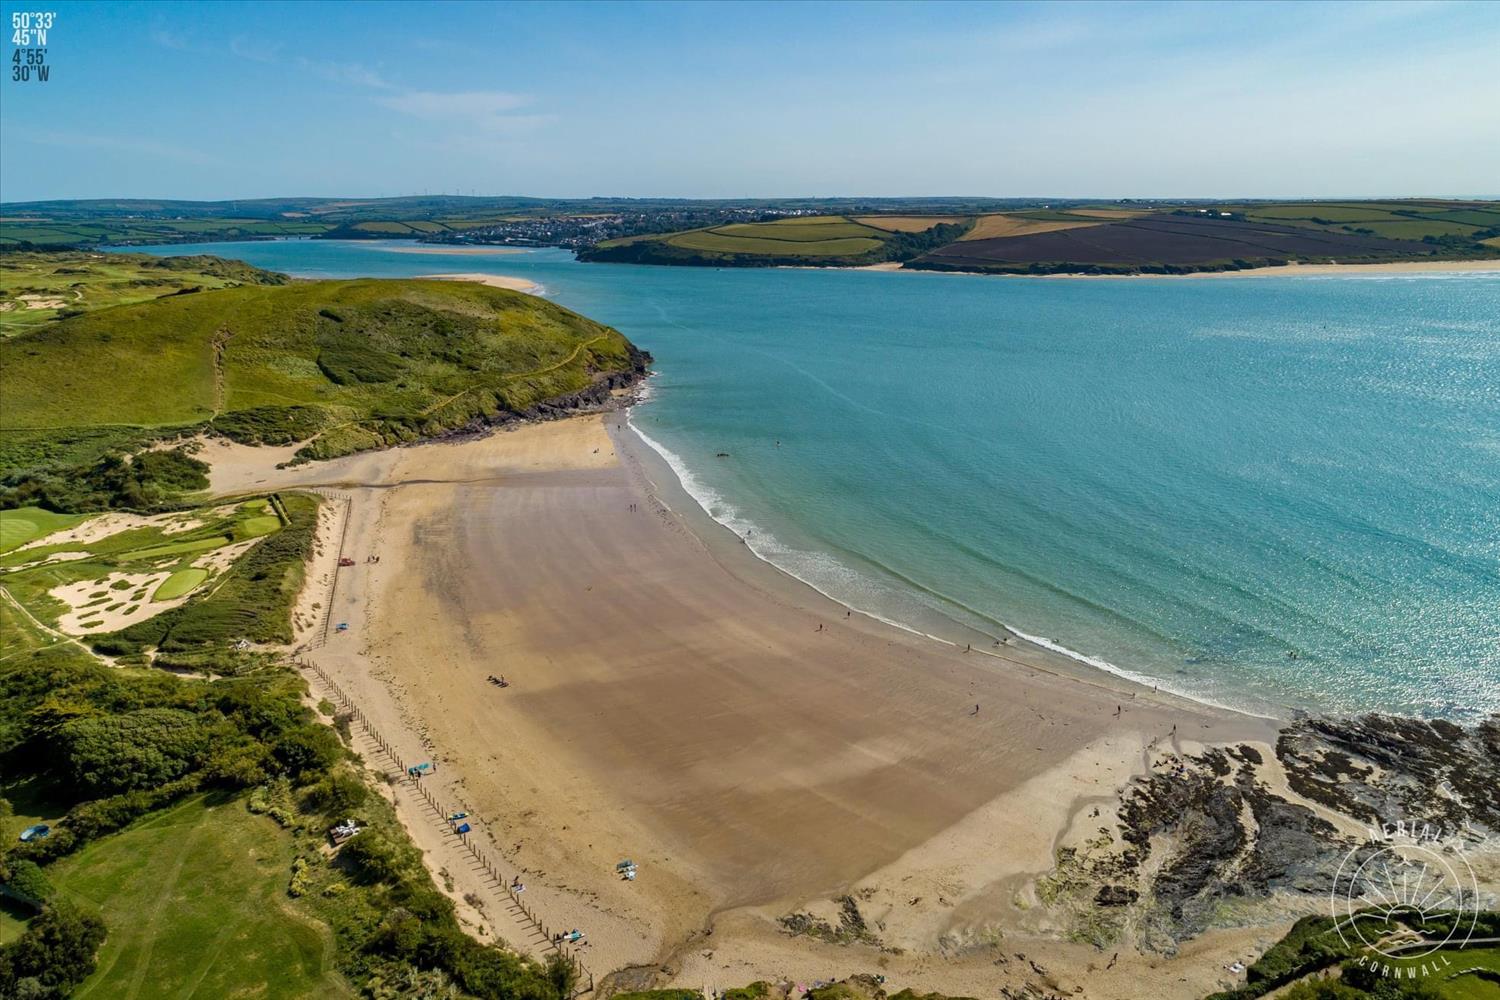 Daymer Bay on the Camel Estuary - near enough to pop over to Padstow for lunch